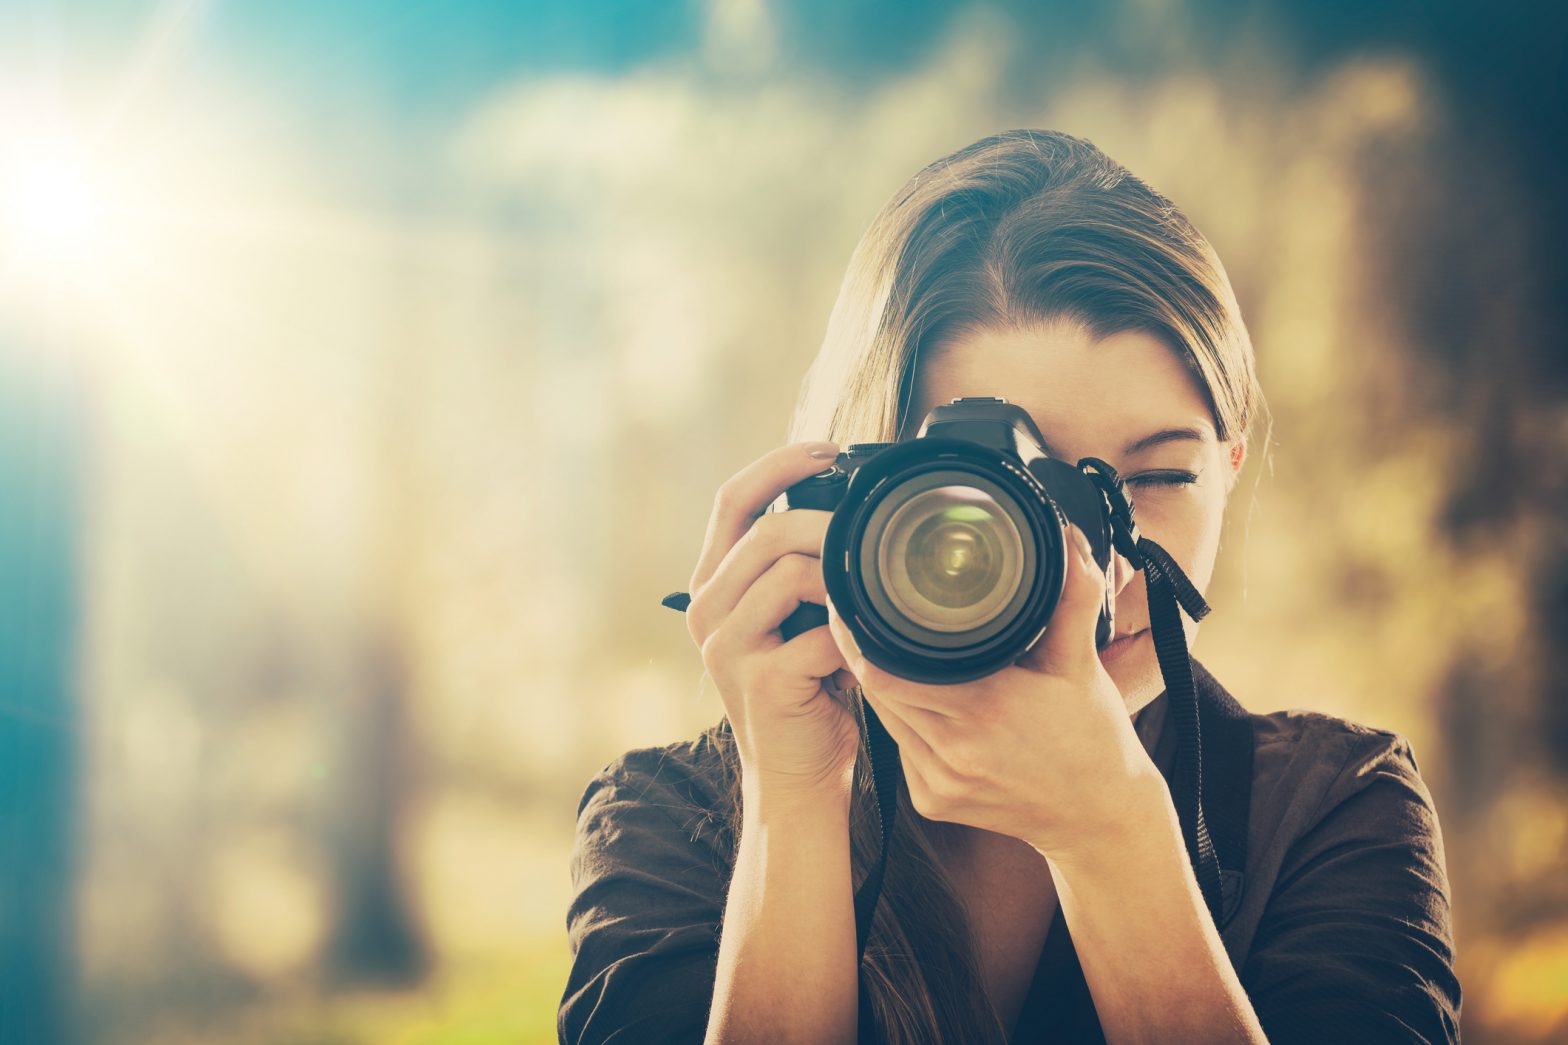 a stock image of a woman taking picture with camera